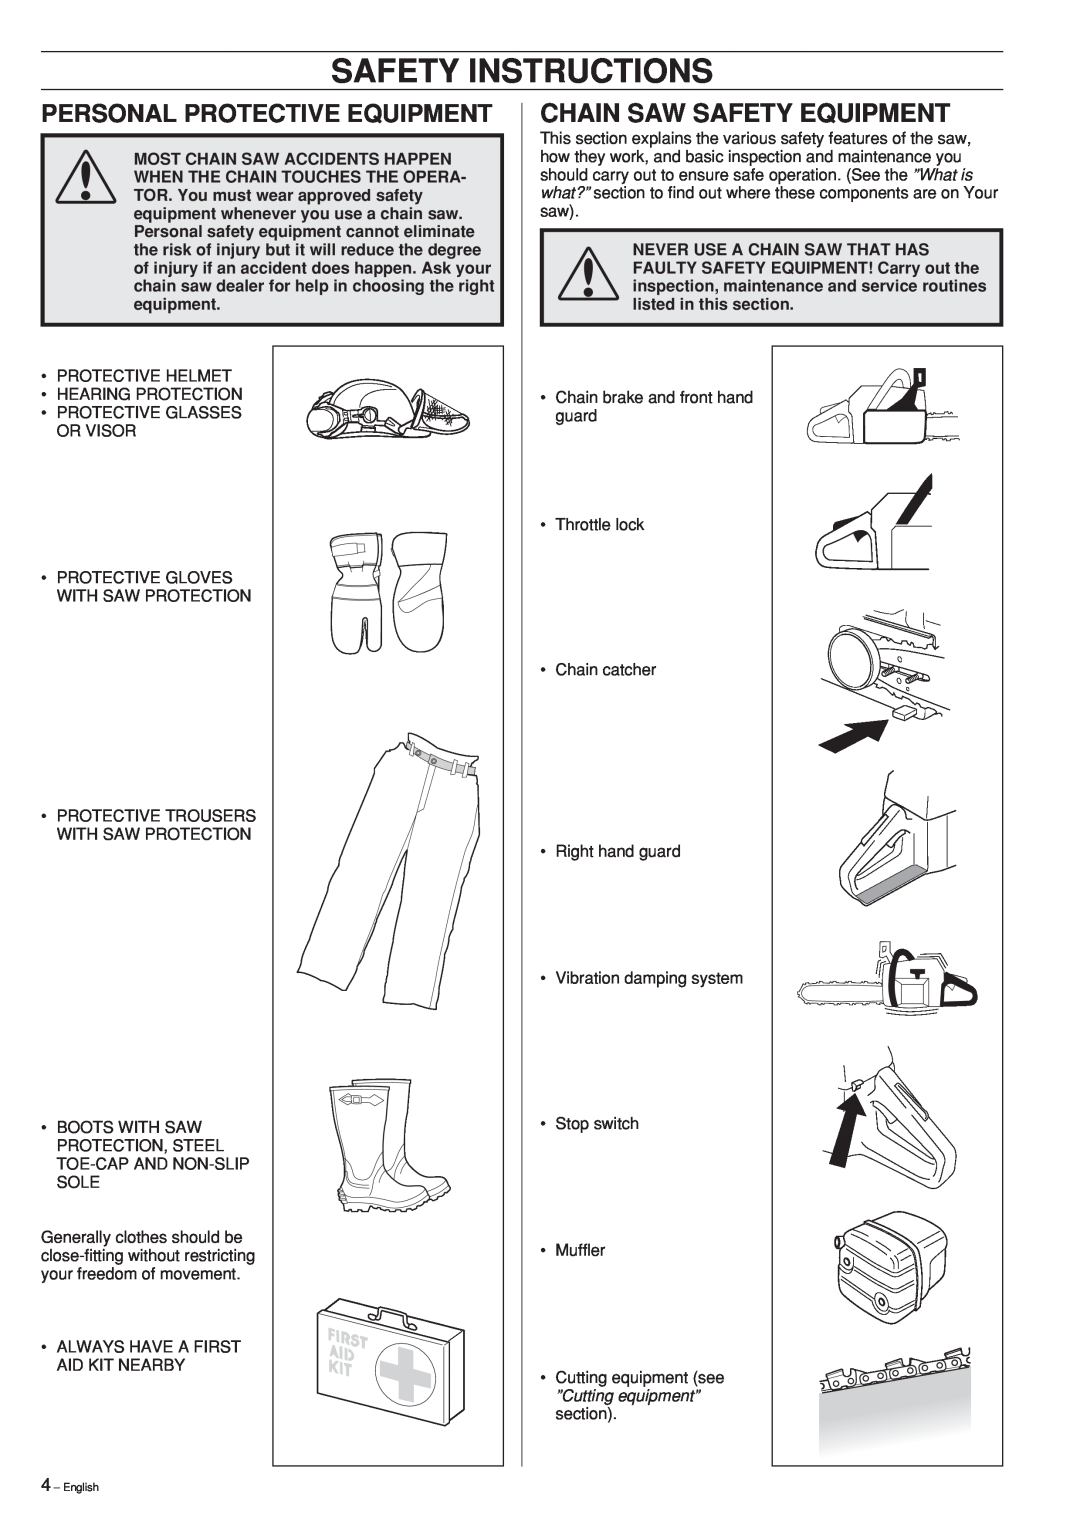 Jonsered cs 2159 manual Safety Instructions, Chain Saw Safety Equipment, Personal Protective Equipment 